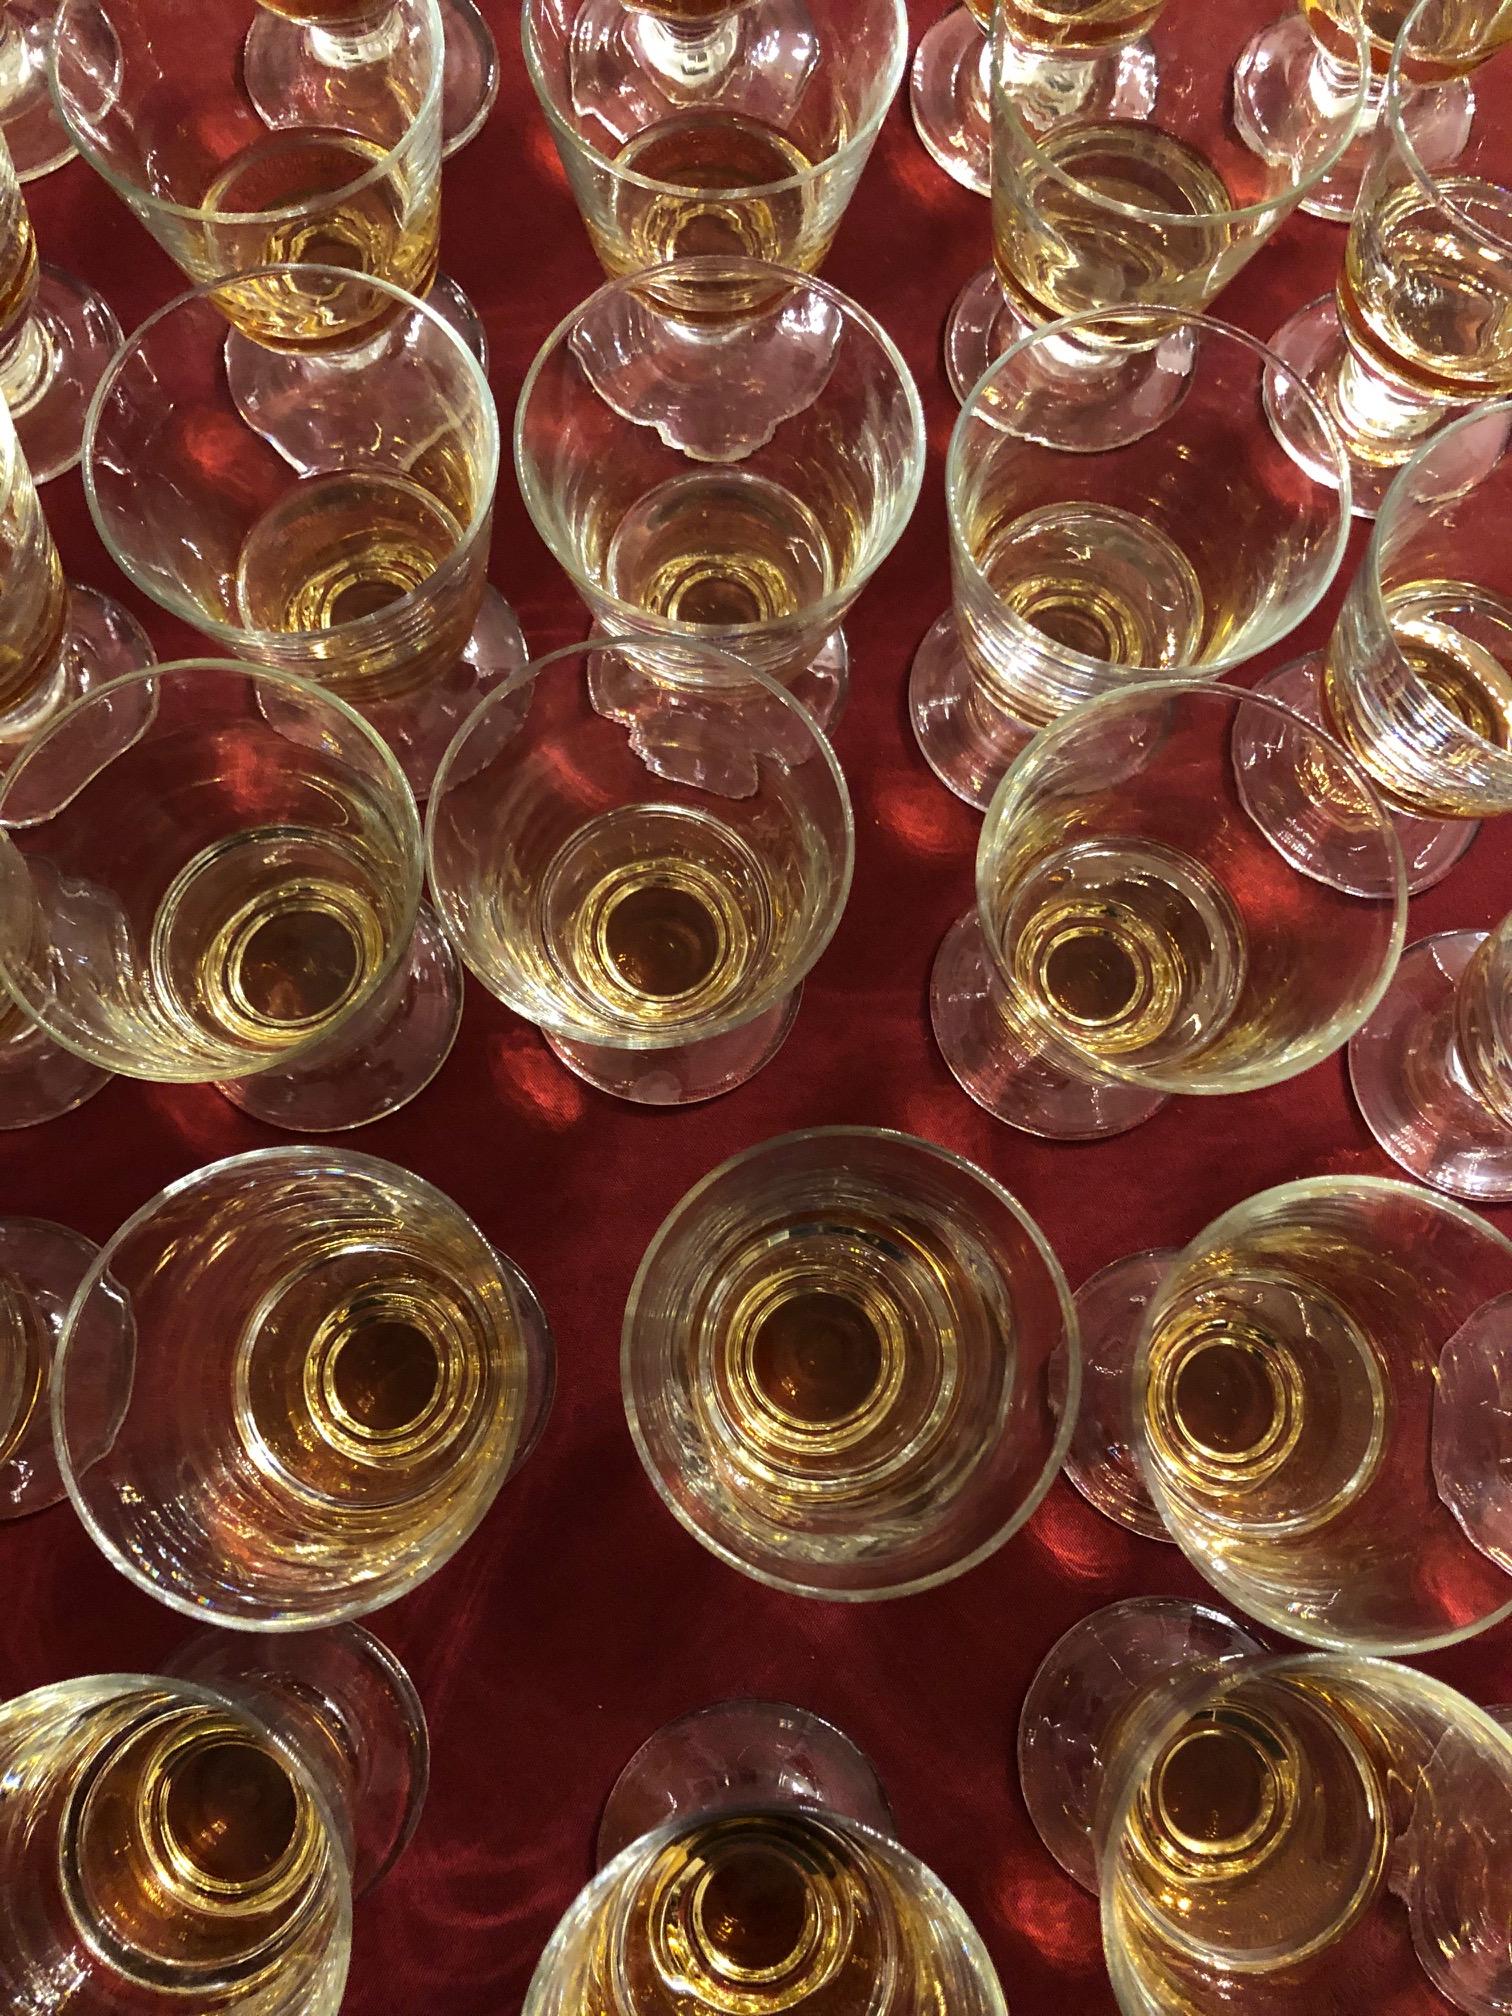 Overhead view of multiple glasses with whiskey pours.